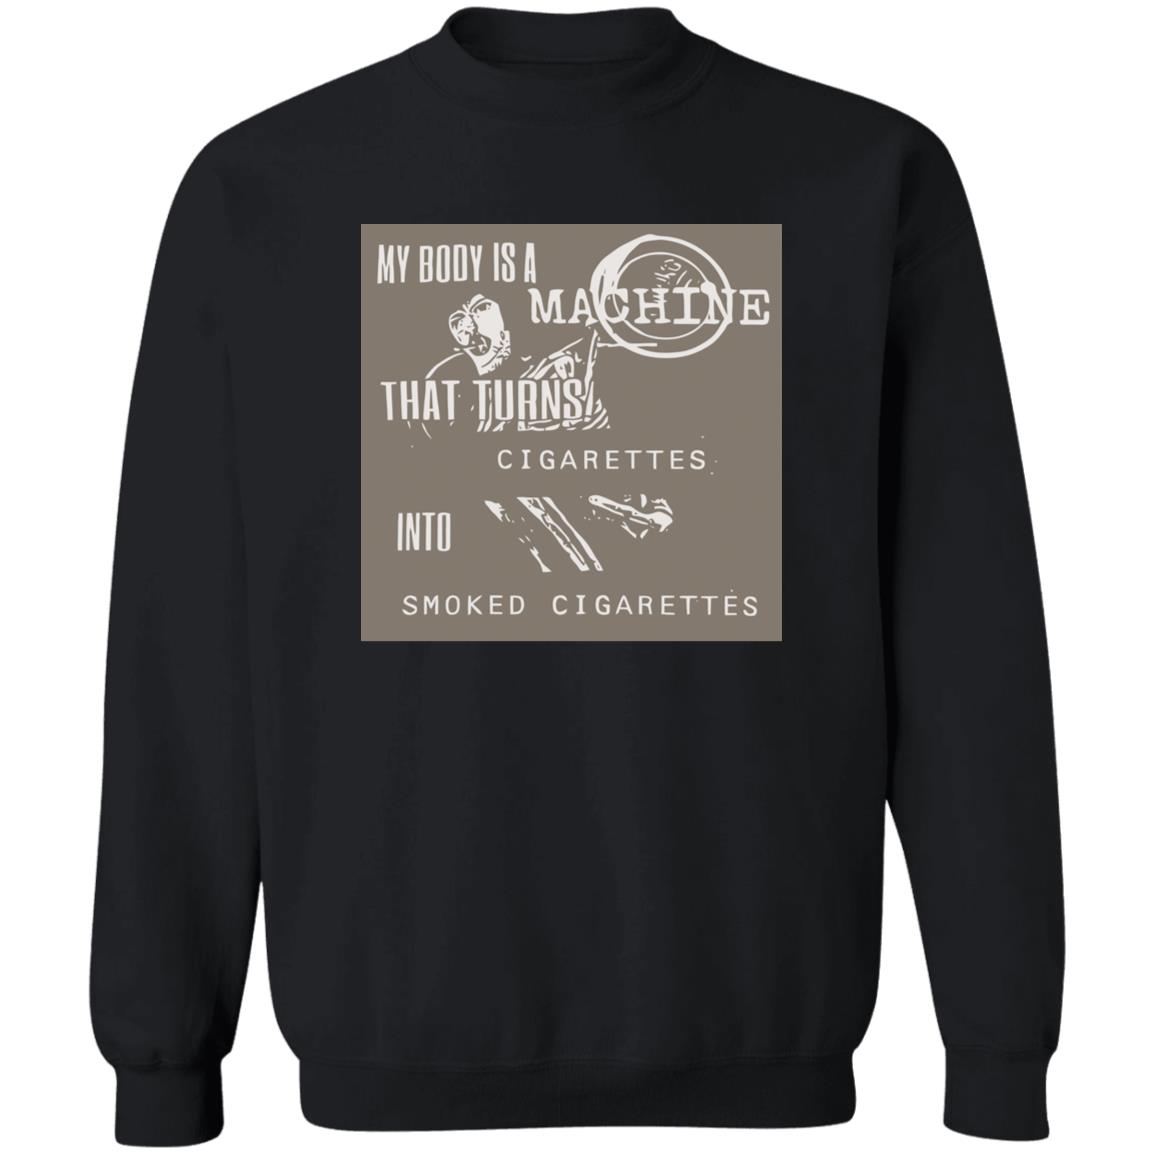 My Body Is A Machine That Turns Cigarettes Into Smoked Cigarettes Shirt 2